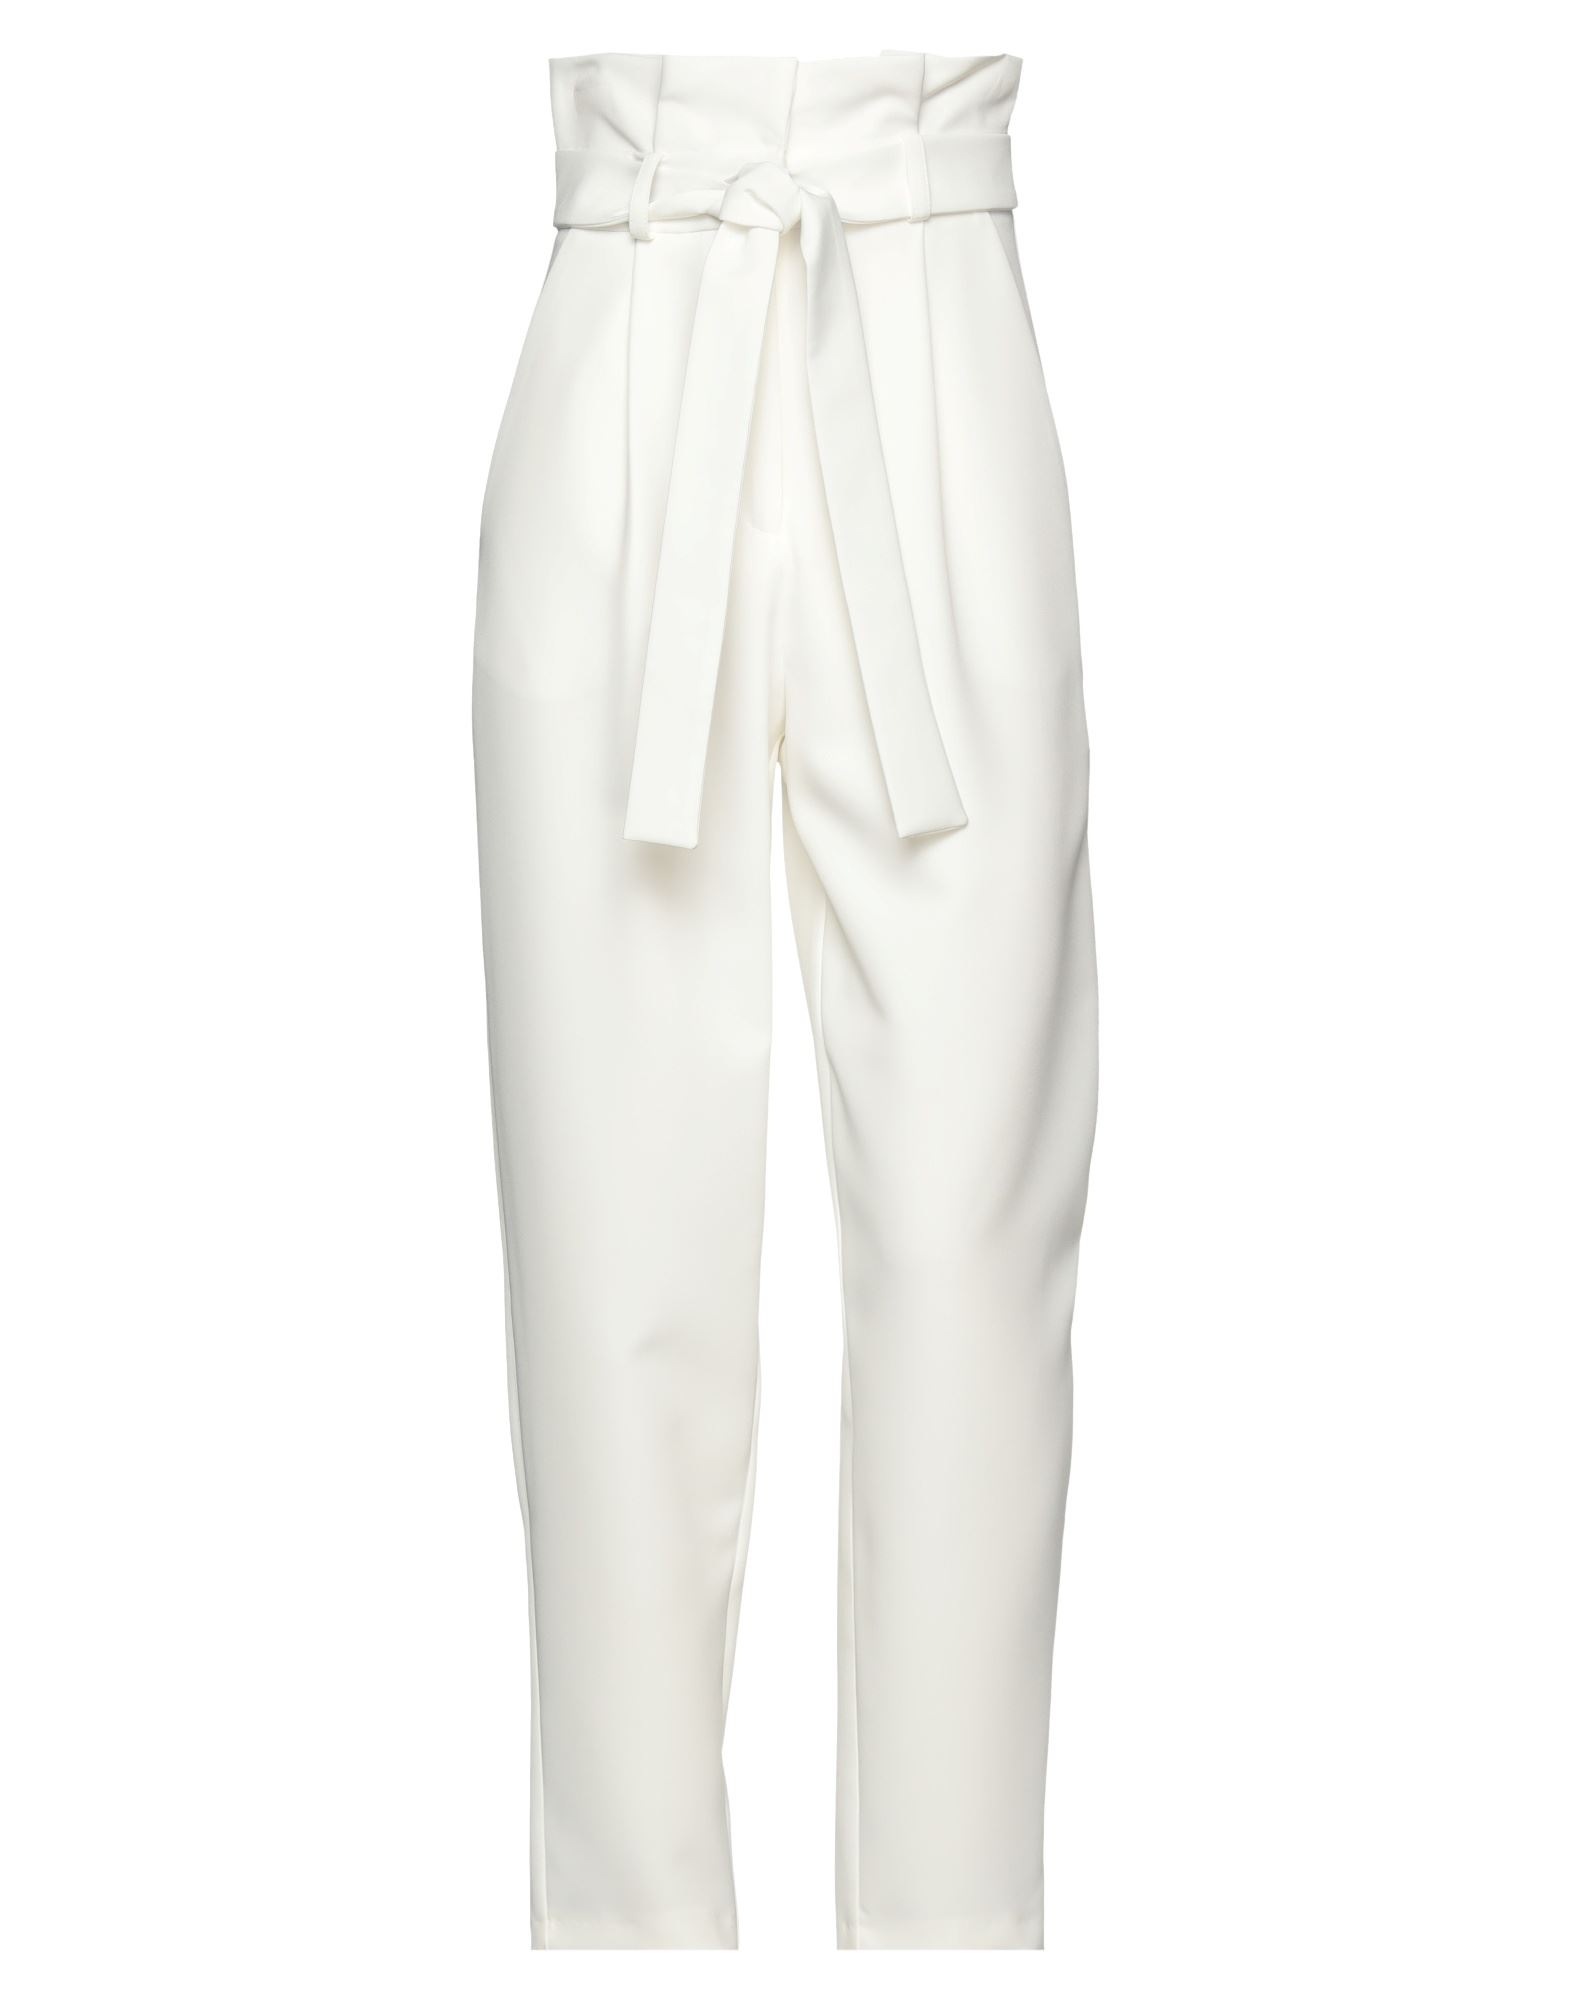 Actualee Pants In White